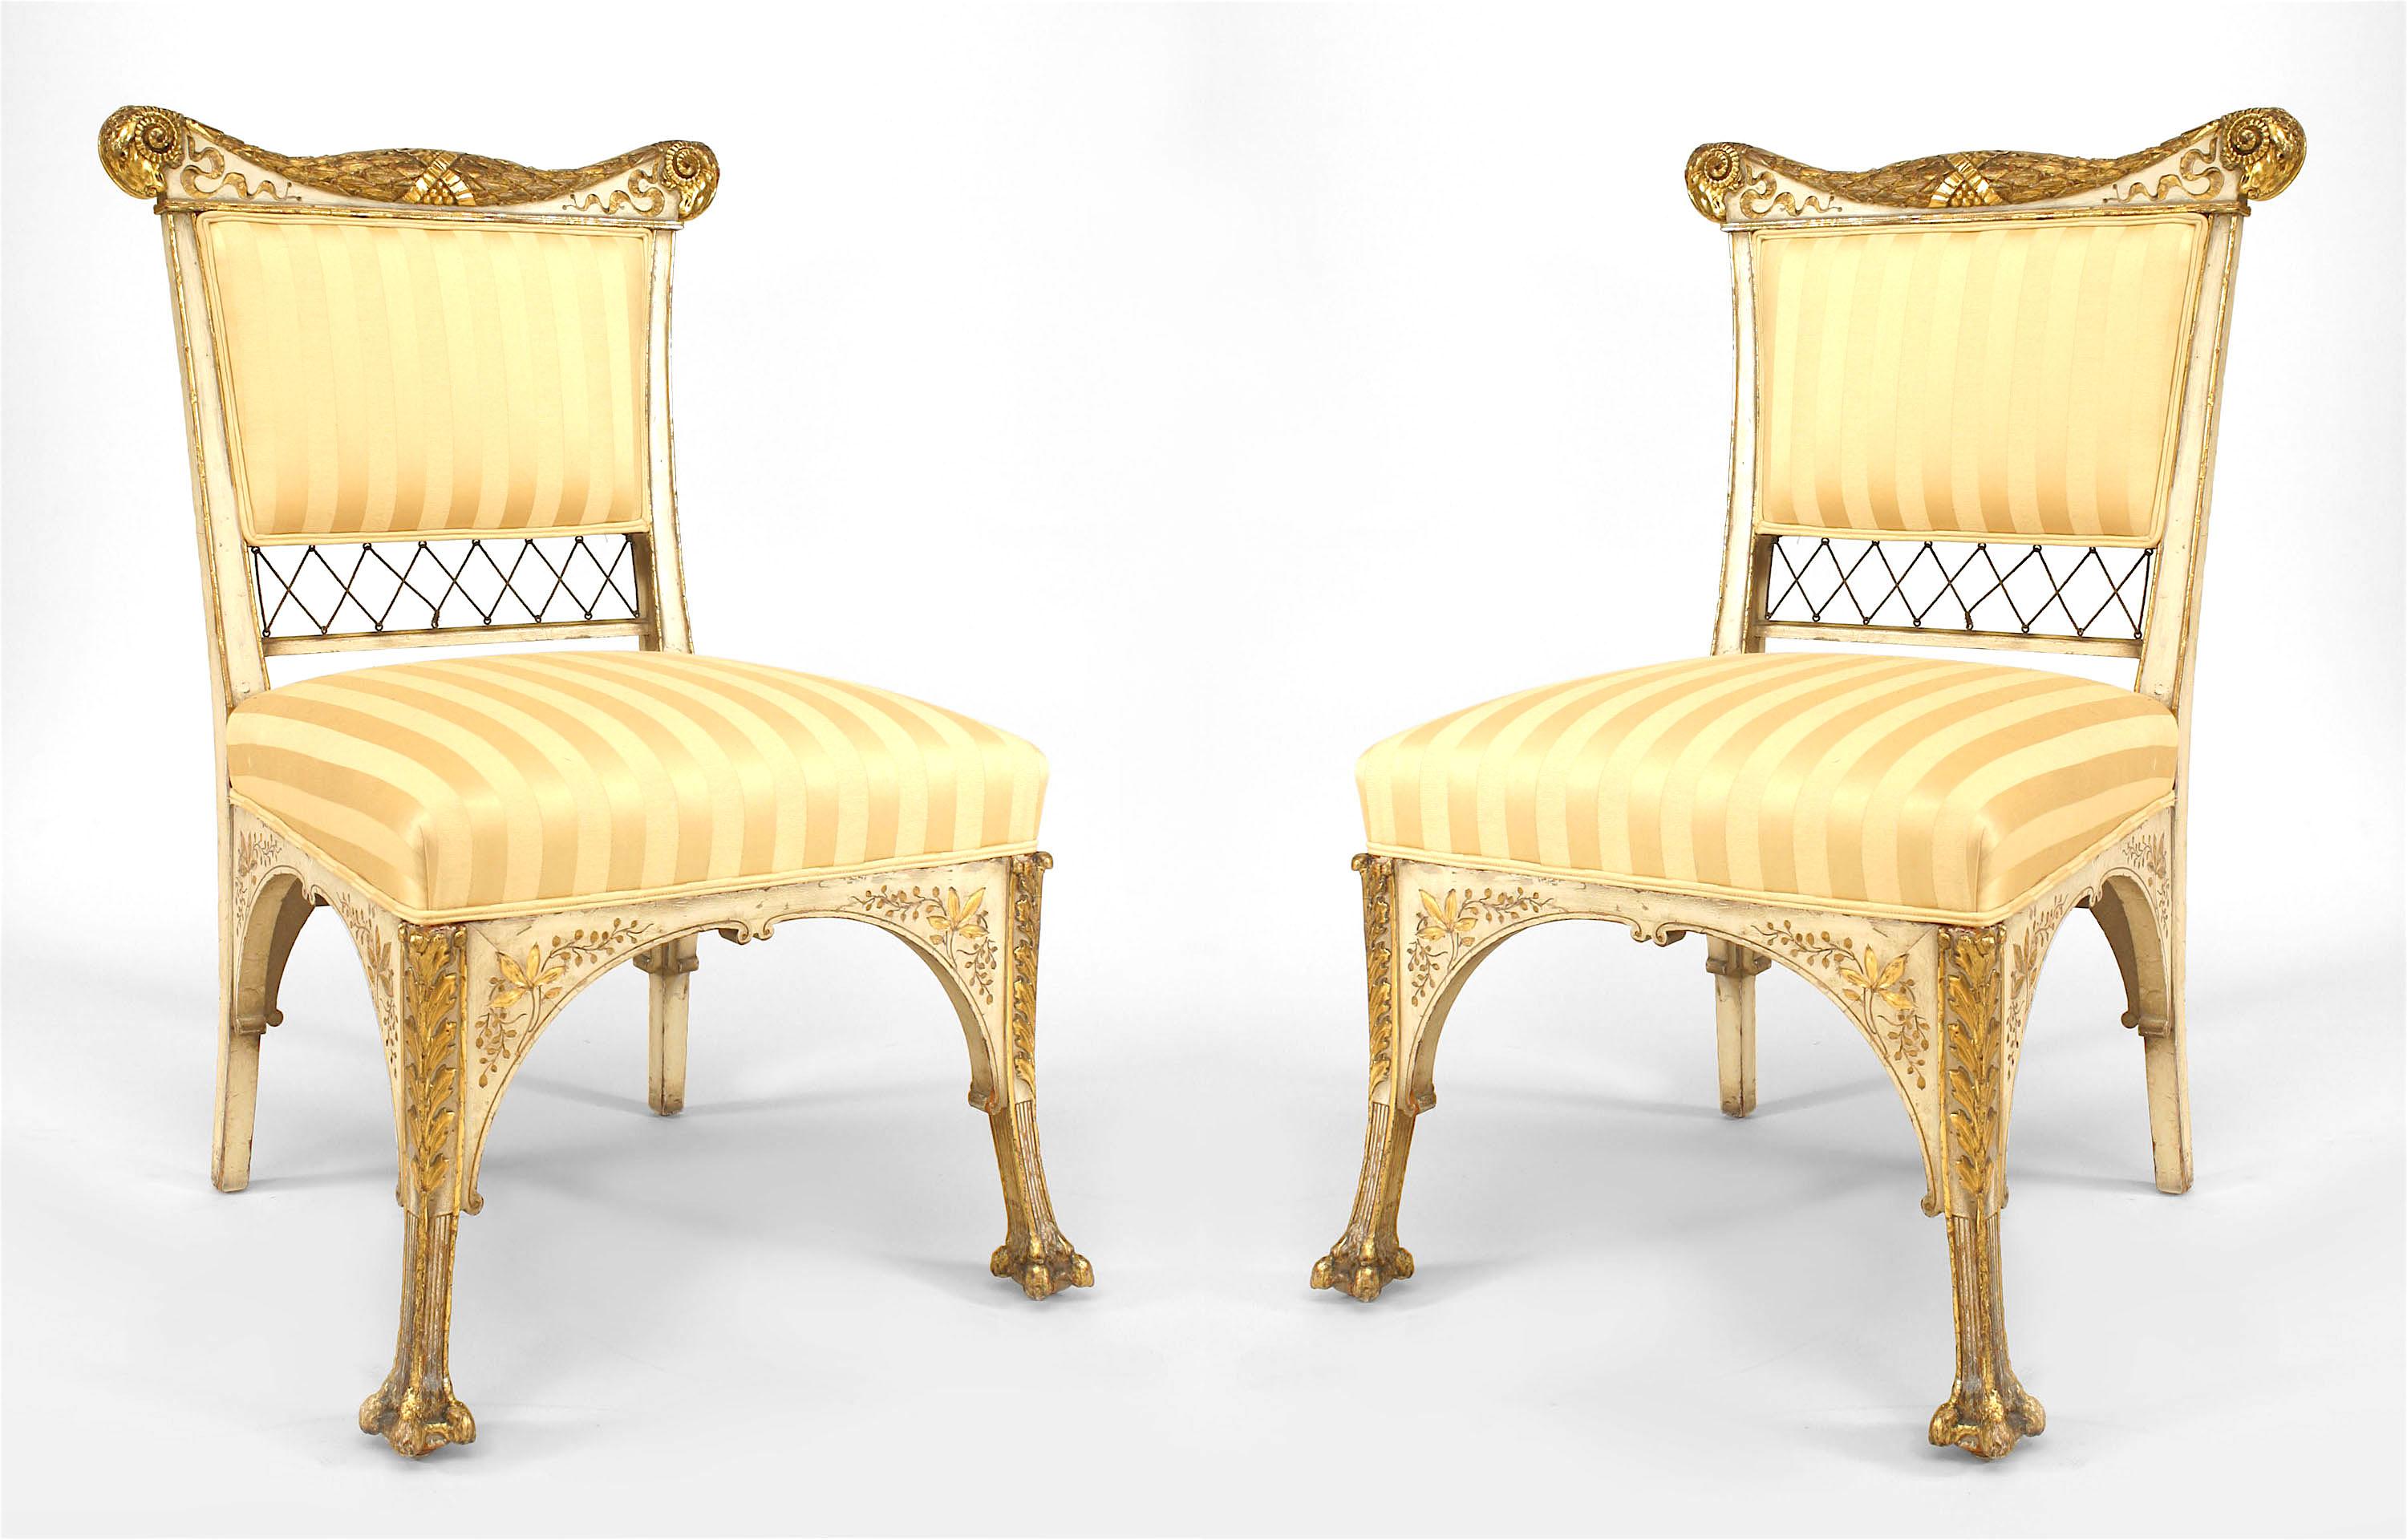 Attributed to famed nineteenth century American furniture designers the Herter Brothers, this pair of white-painted side chairs feature striped upholstery,  carved and gilded backs with lattice bottoms, and intricately carved, clawfooted parcel gilt